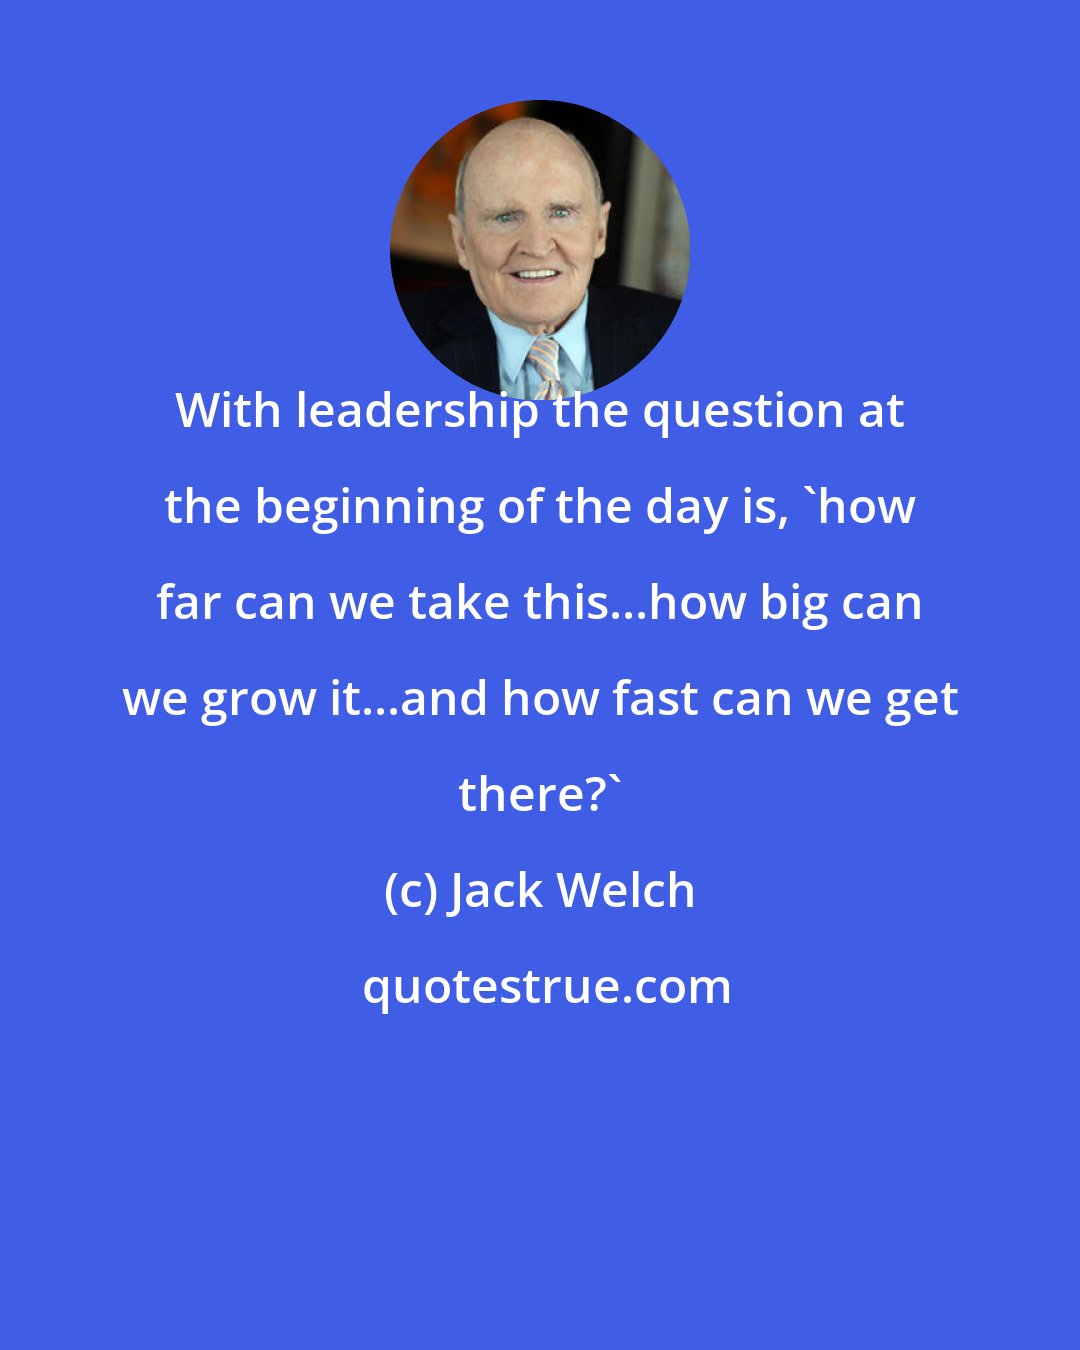 Jack Welch: With leadership the question at the beginning of the day is, 'how far can we take this...how big can we grow it...and how fast can we get there?'